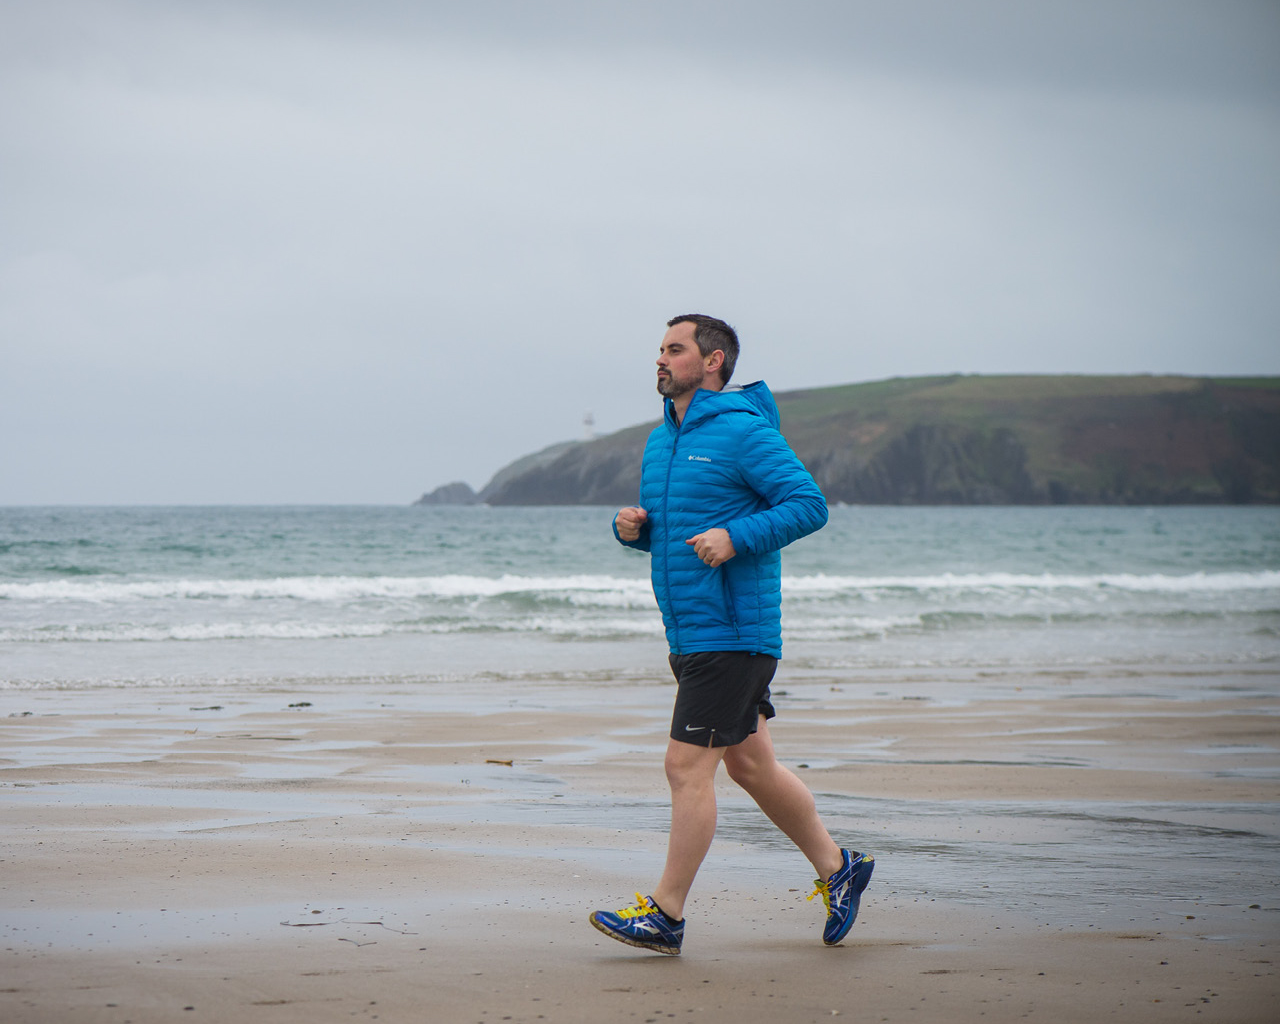 Karl Henry in a blue top, running on a beach